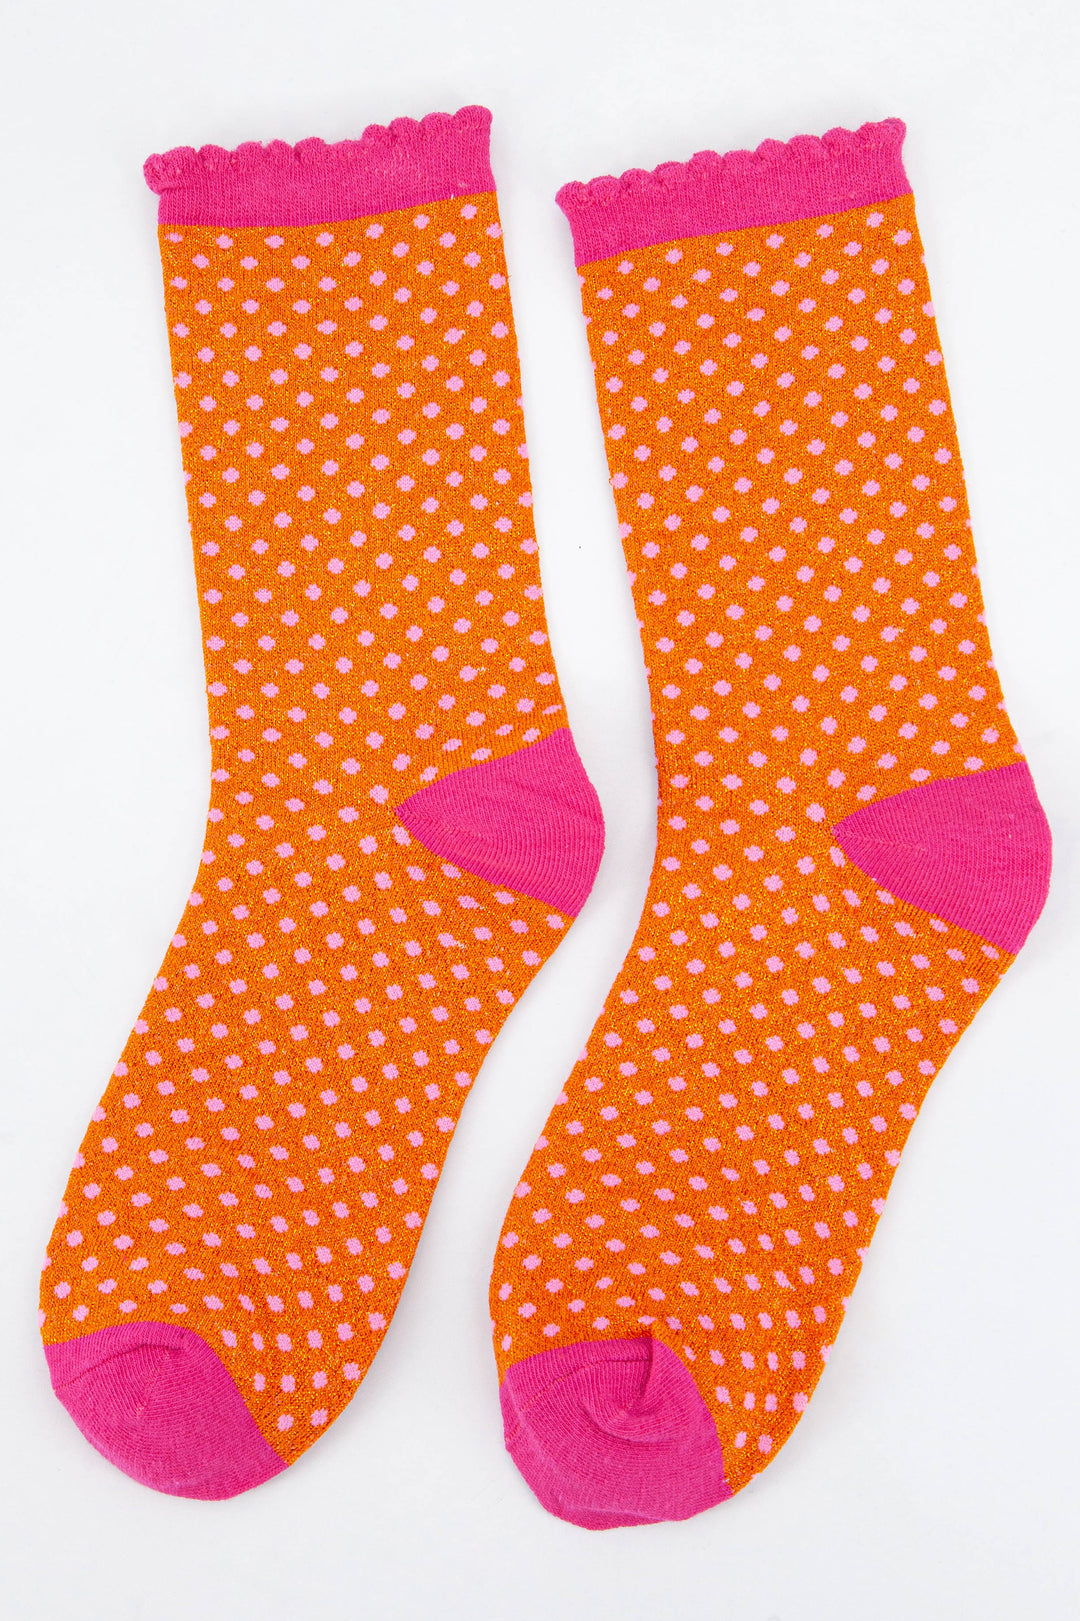 orange and pink polka dot glitter ankle socks with an all over sparkly shimmer